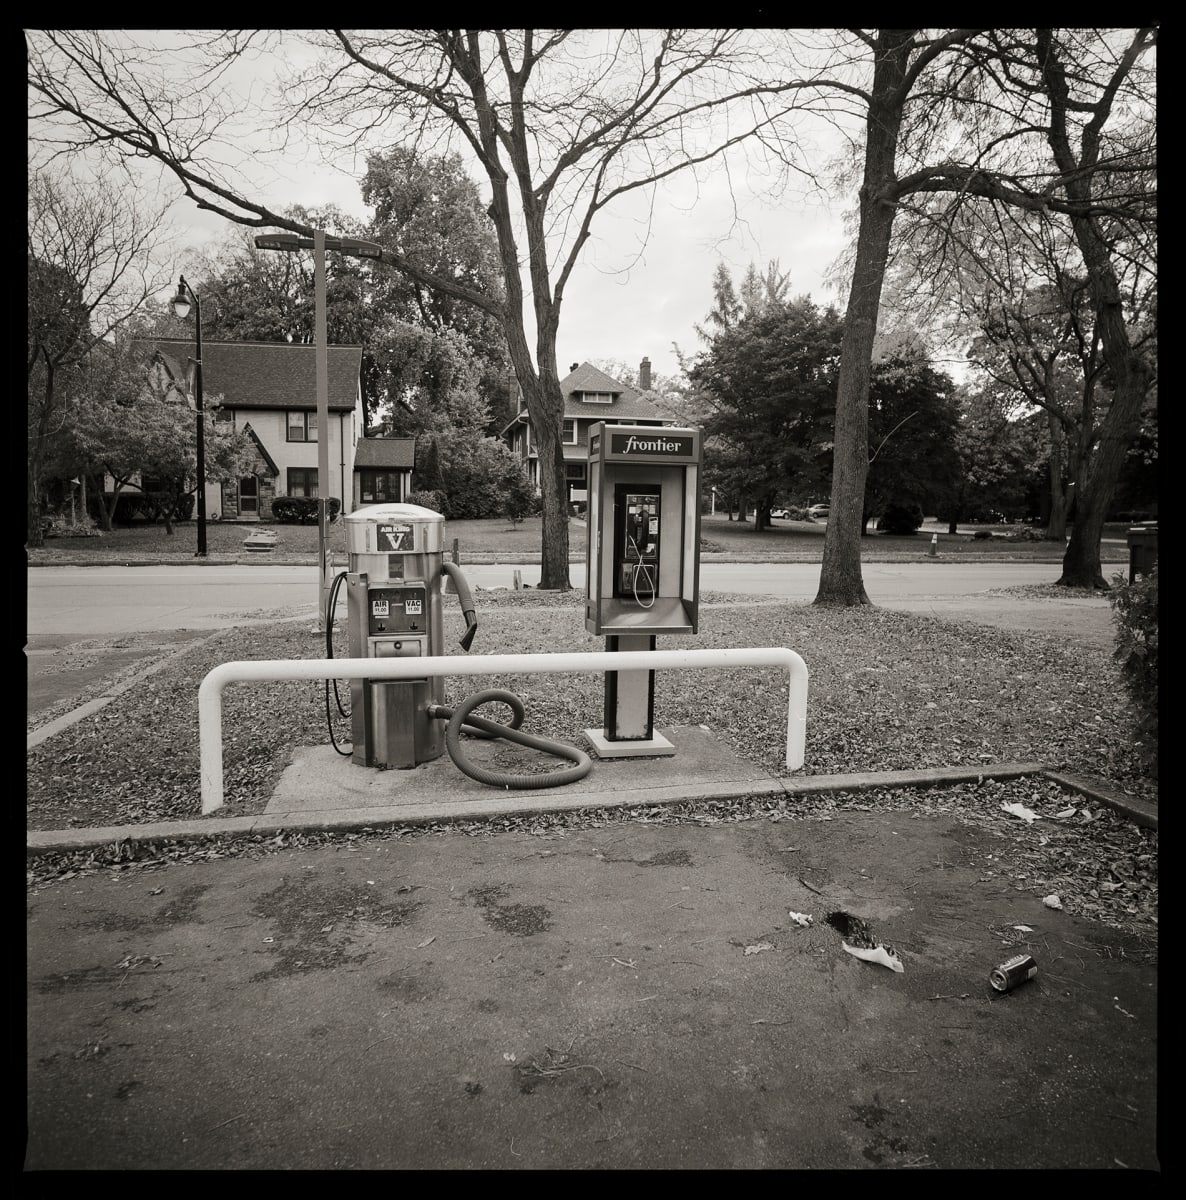 585.288.9865 – Adams Mobile Service, 575 North Winton Road, Rochester, NY 14610 by Eric T. Kunsman  Image: ID: A black and white image shows a payphone next to an air compressor for filling tires.  There is a street behind the payphone.